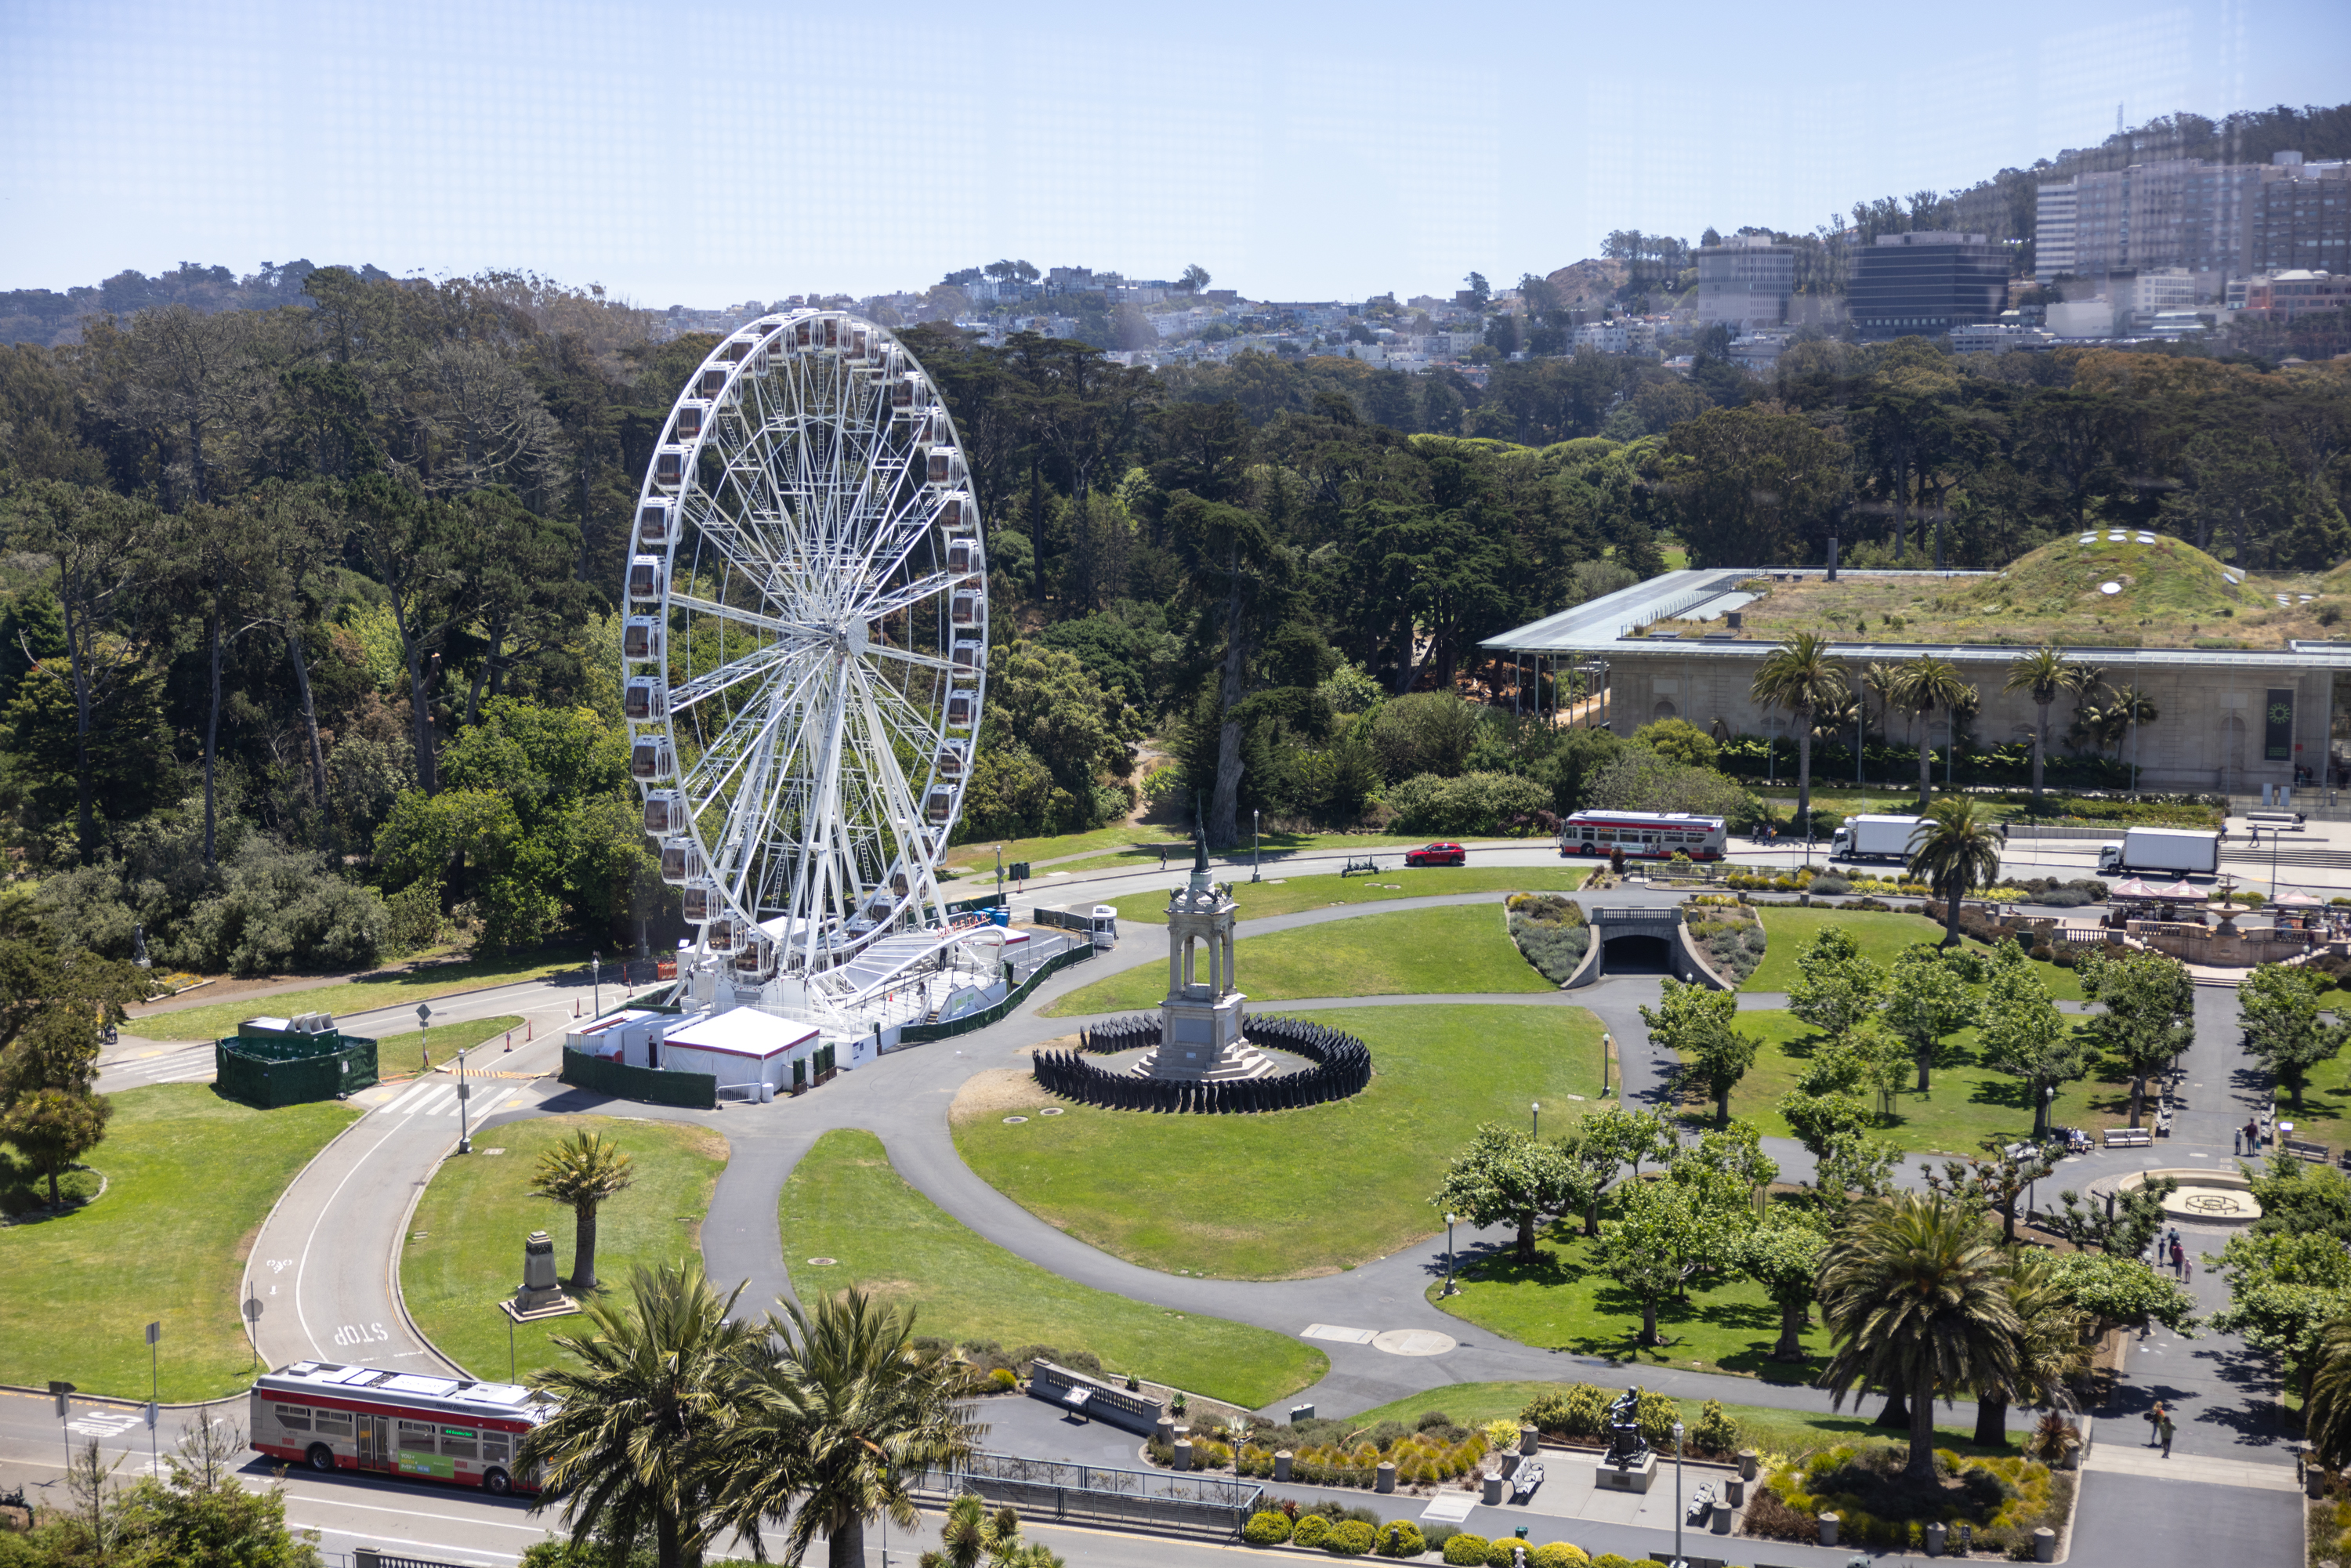 A Ferris wheel in a park with lush trees, paths, a sculpture, and a tram passing by.